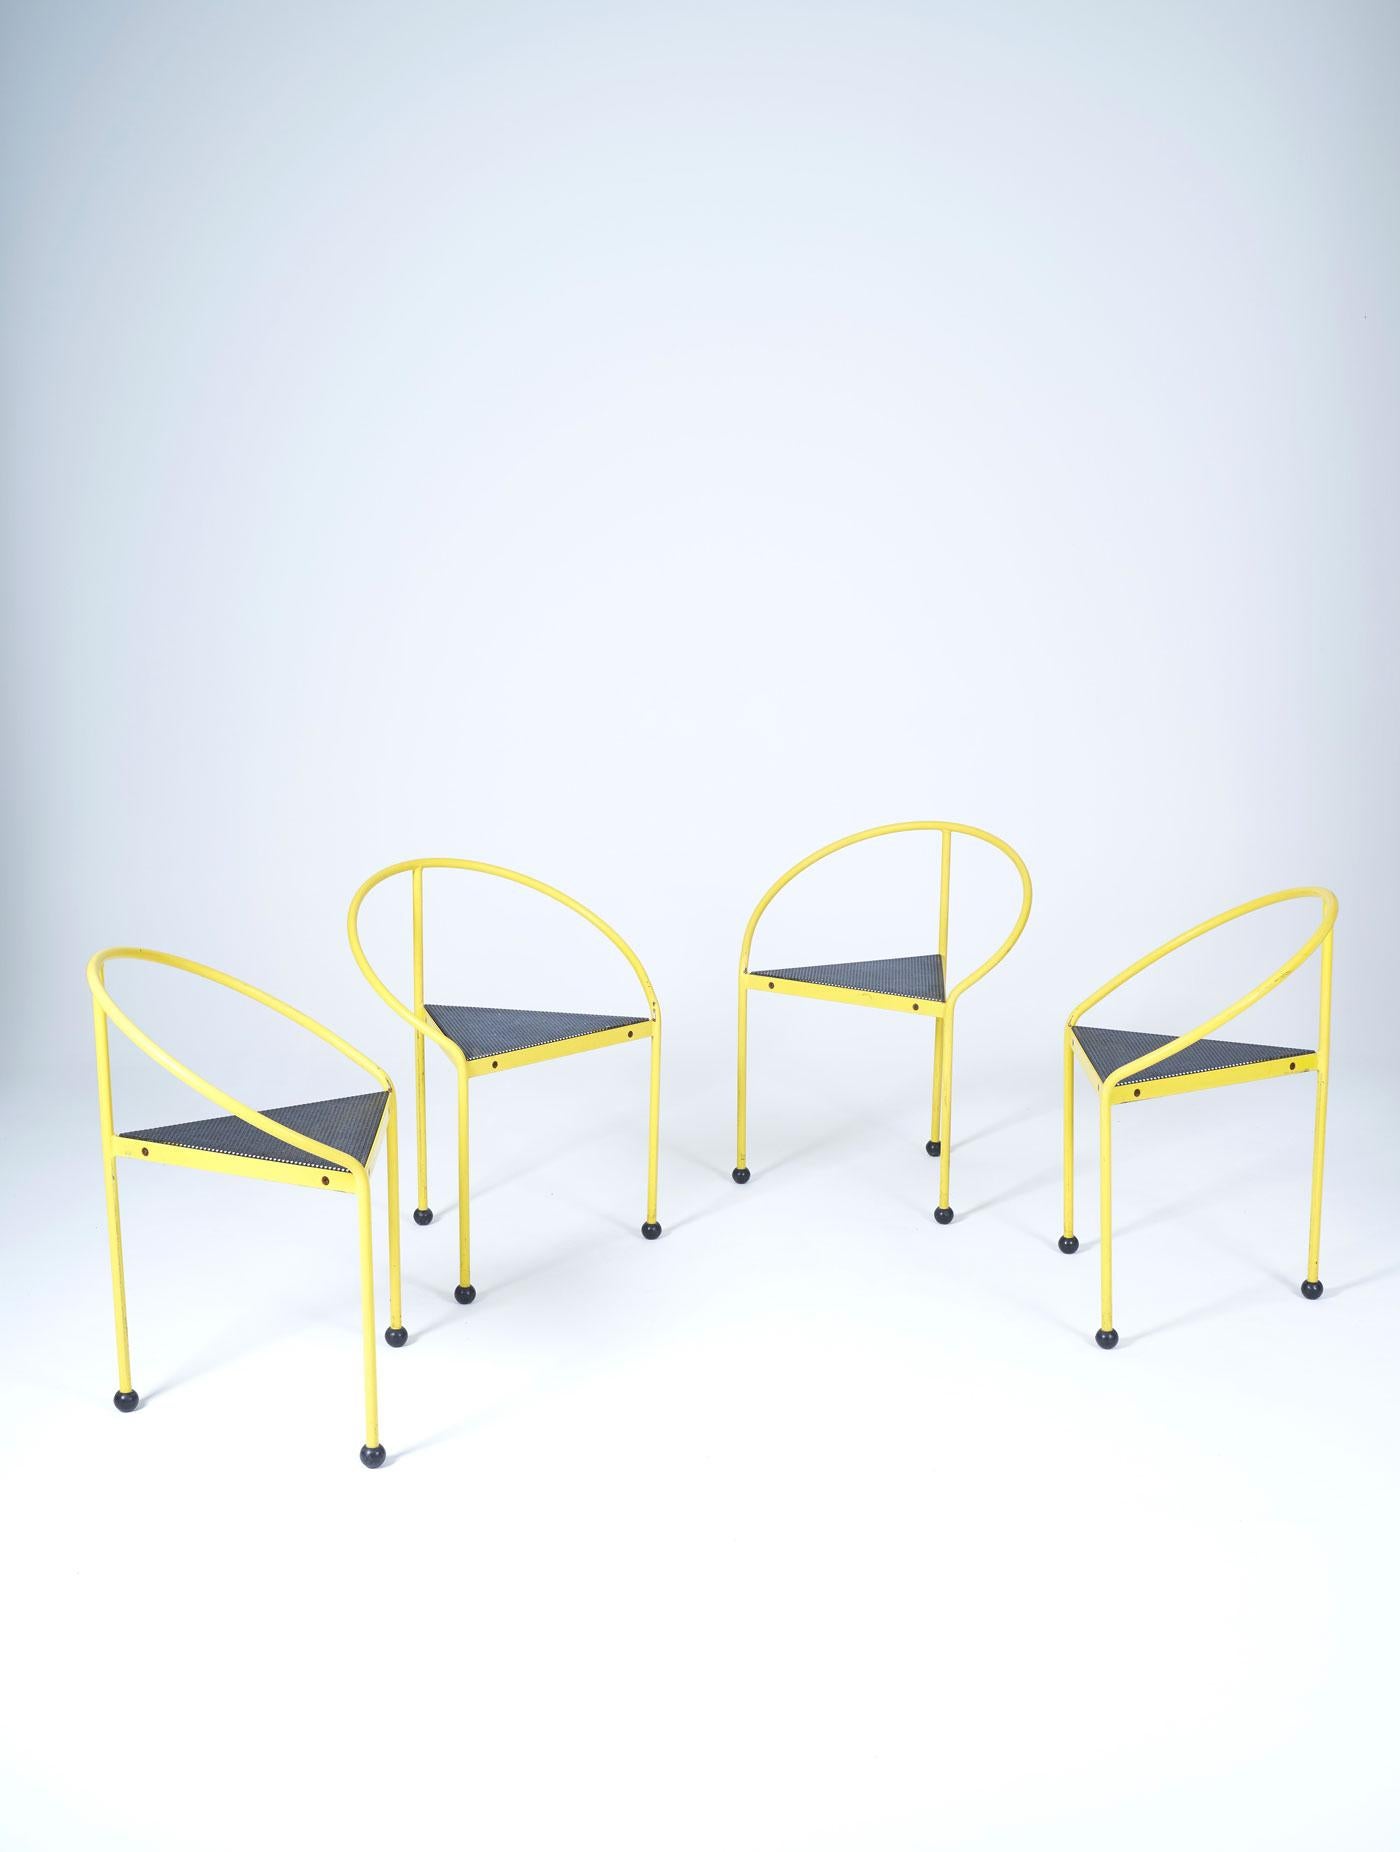 Set of 4 chairs model 'Bermuda' by designer Carlos Miret for Amat in the 1980s (1986). Yellow lacquered iron frame and perforated metal seat. This Memphis-style tripod chair will complement furniture by designers Ettore Sottsass, Andrea Branzi,